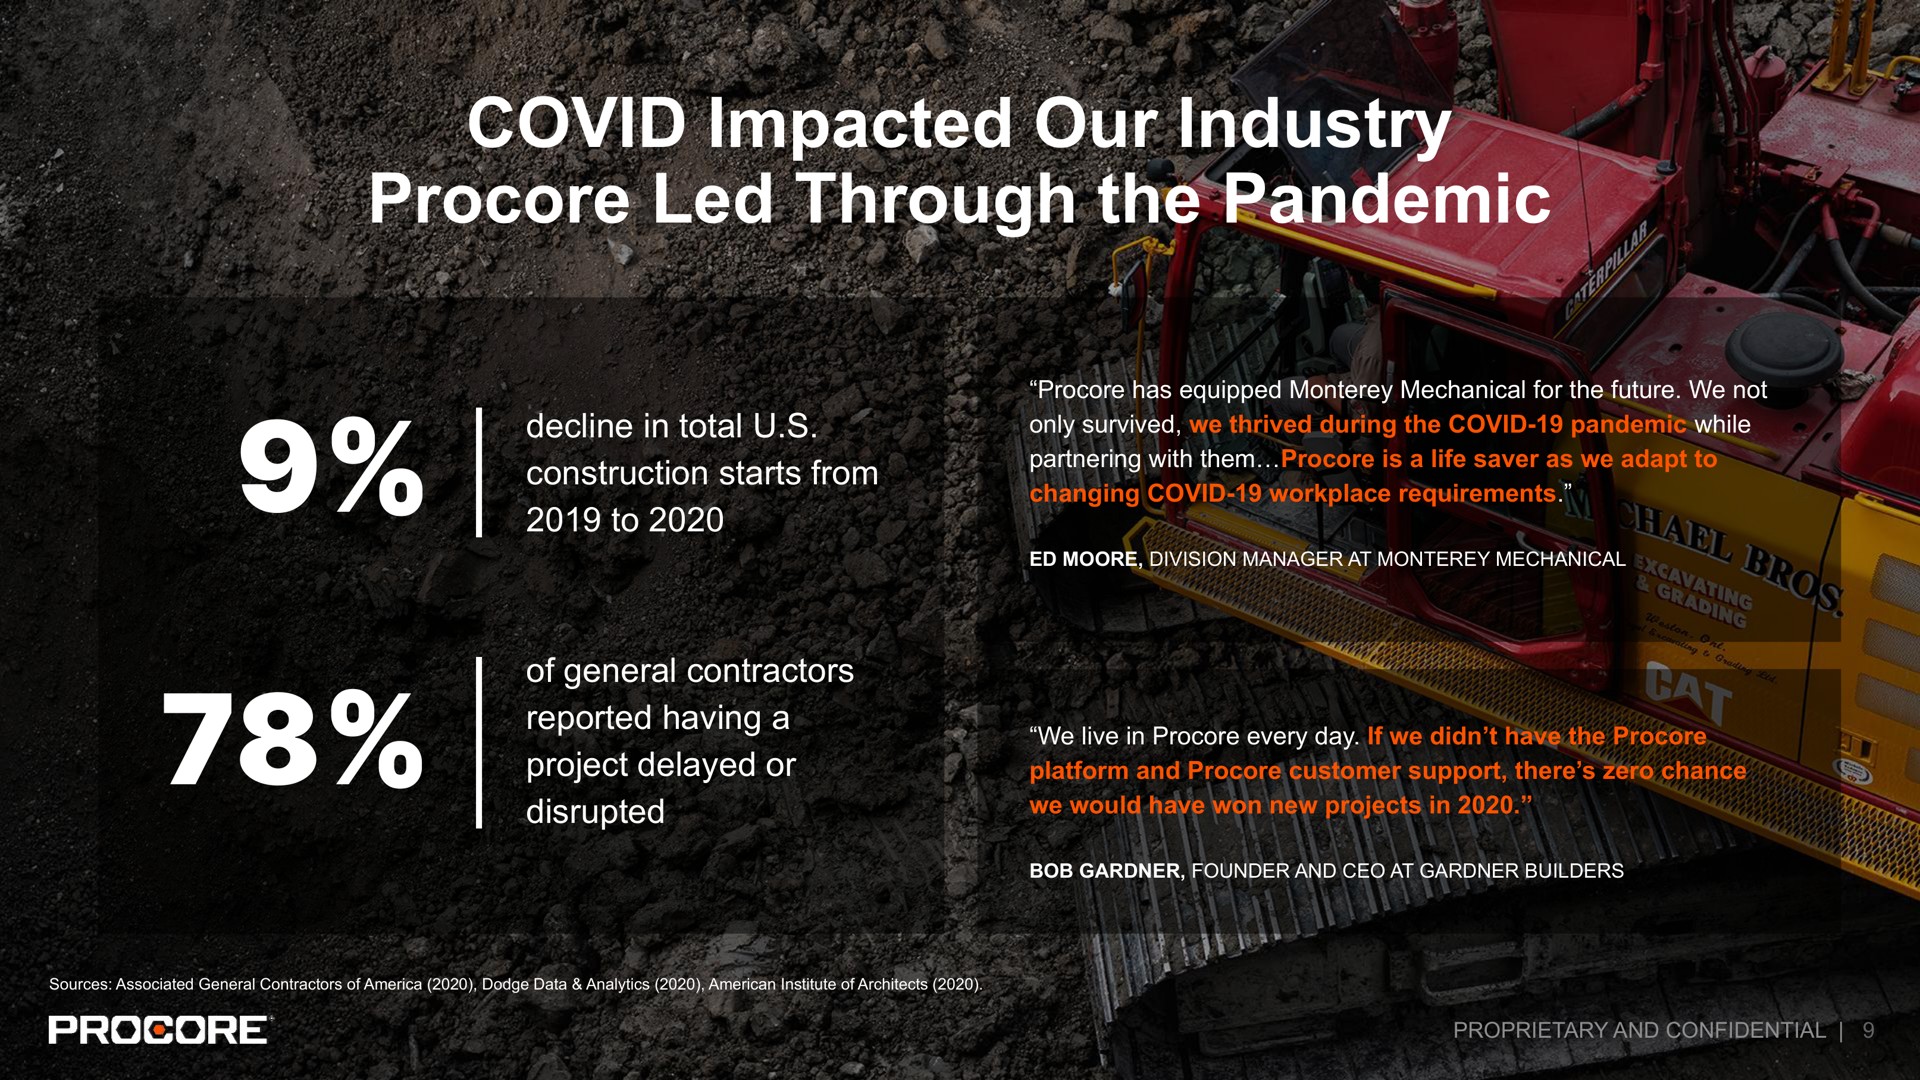 covid impacted our industry led through the pandemic | Procore